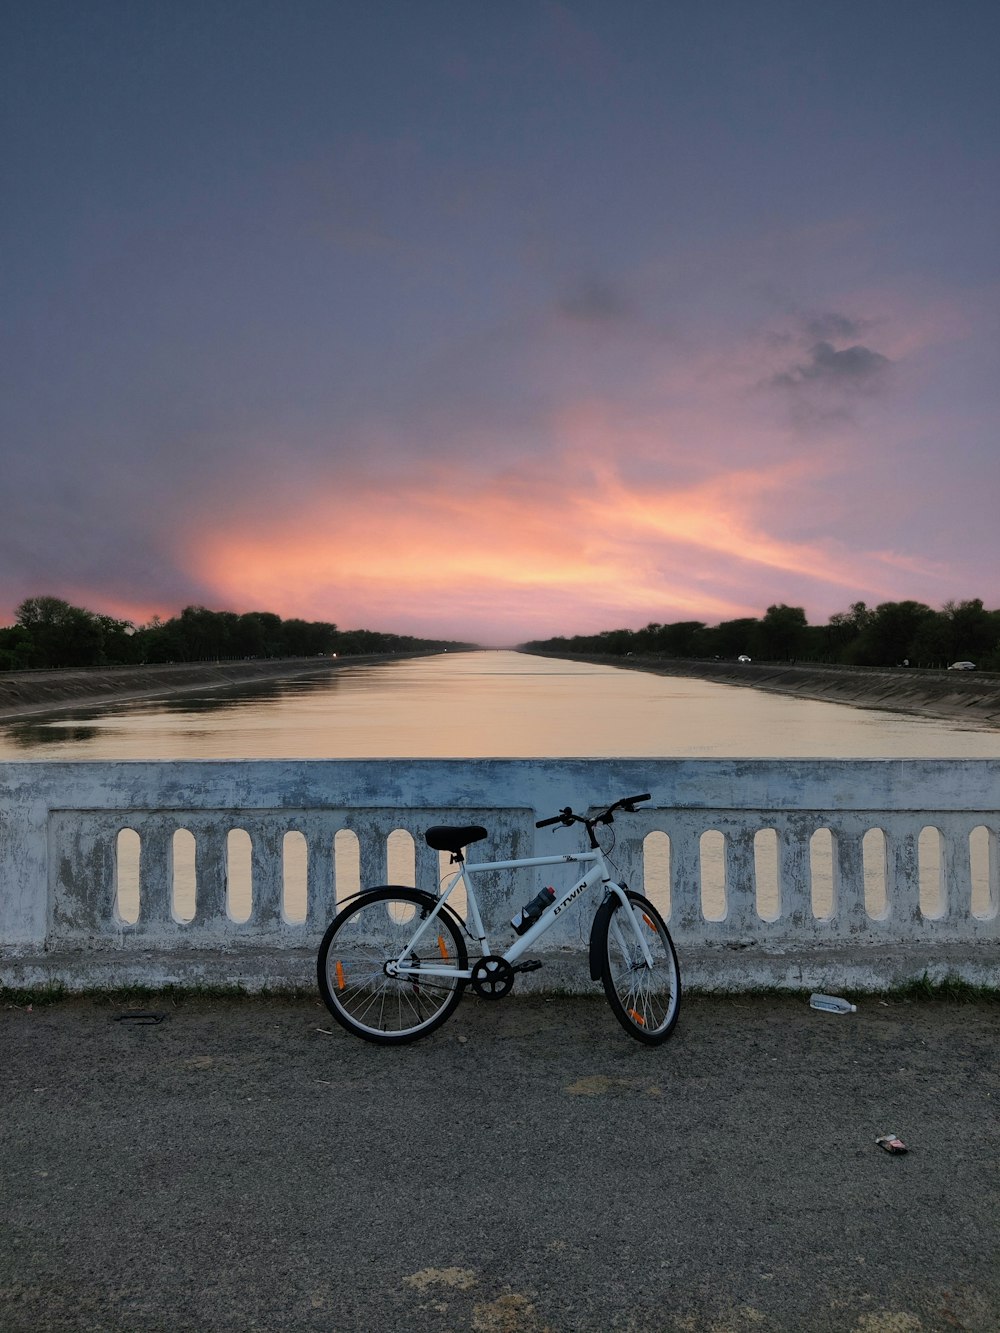 a bike parked on the side of a bridge next to a body of water